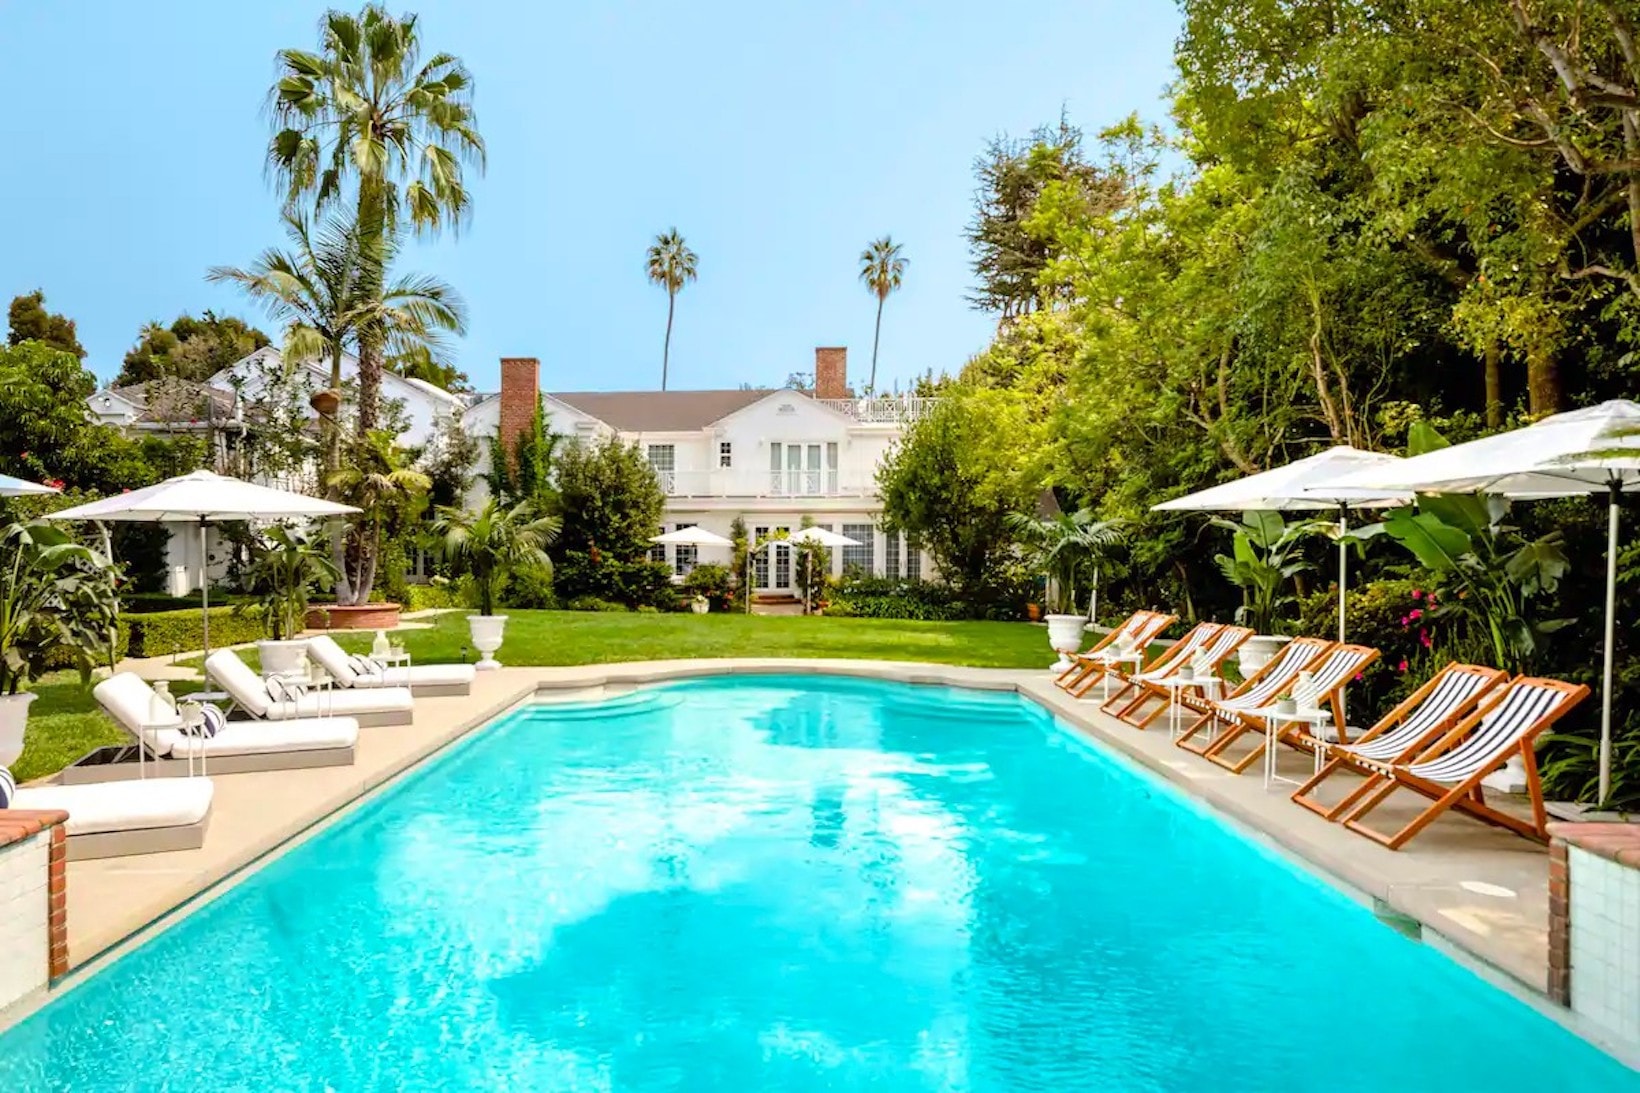 will smith the fresh prince of bel air mansion airbnb brentwood california united states